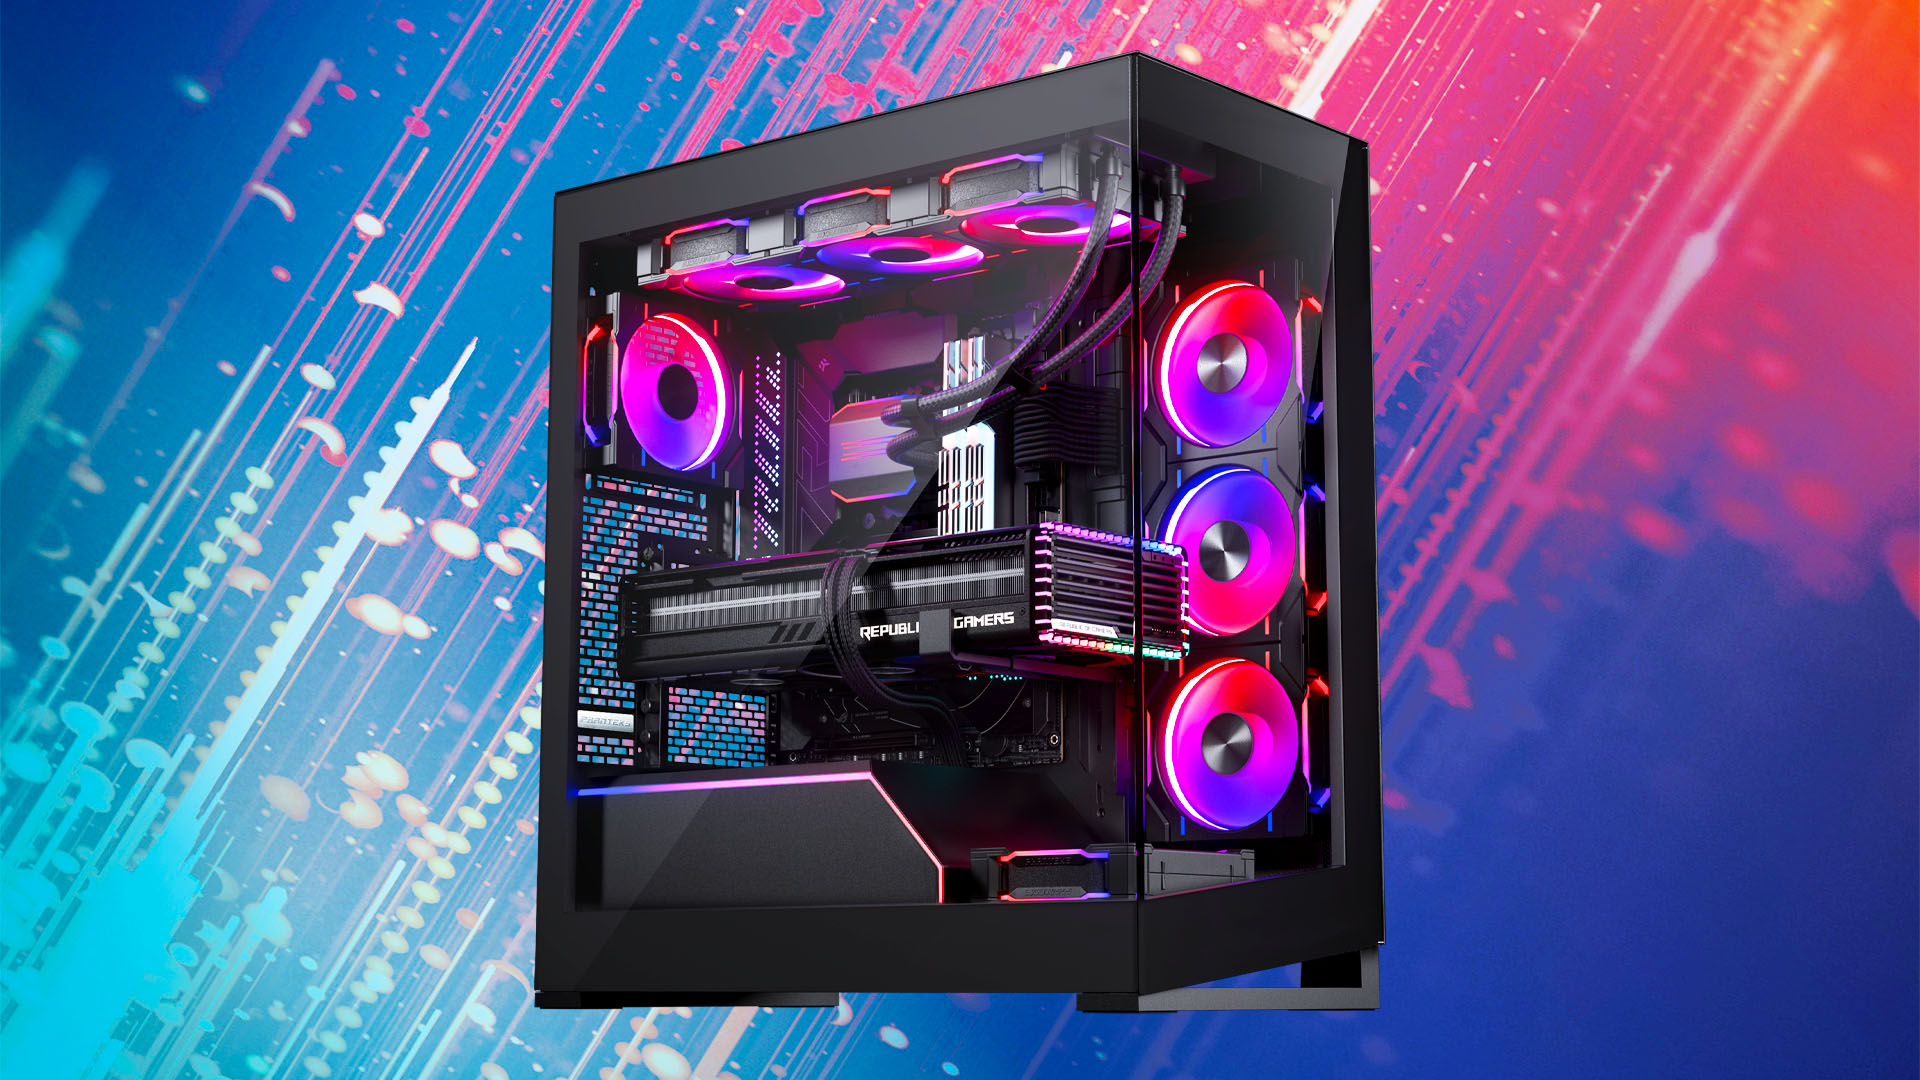 This new Phanteks NV5 case is ideal for showing off your rig